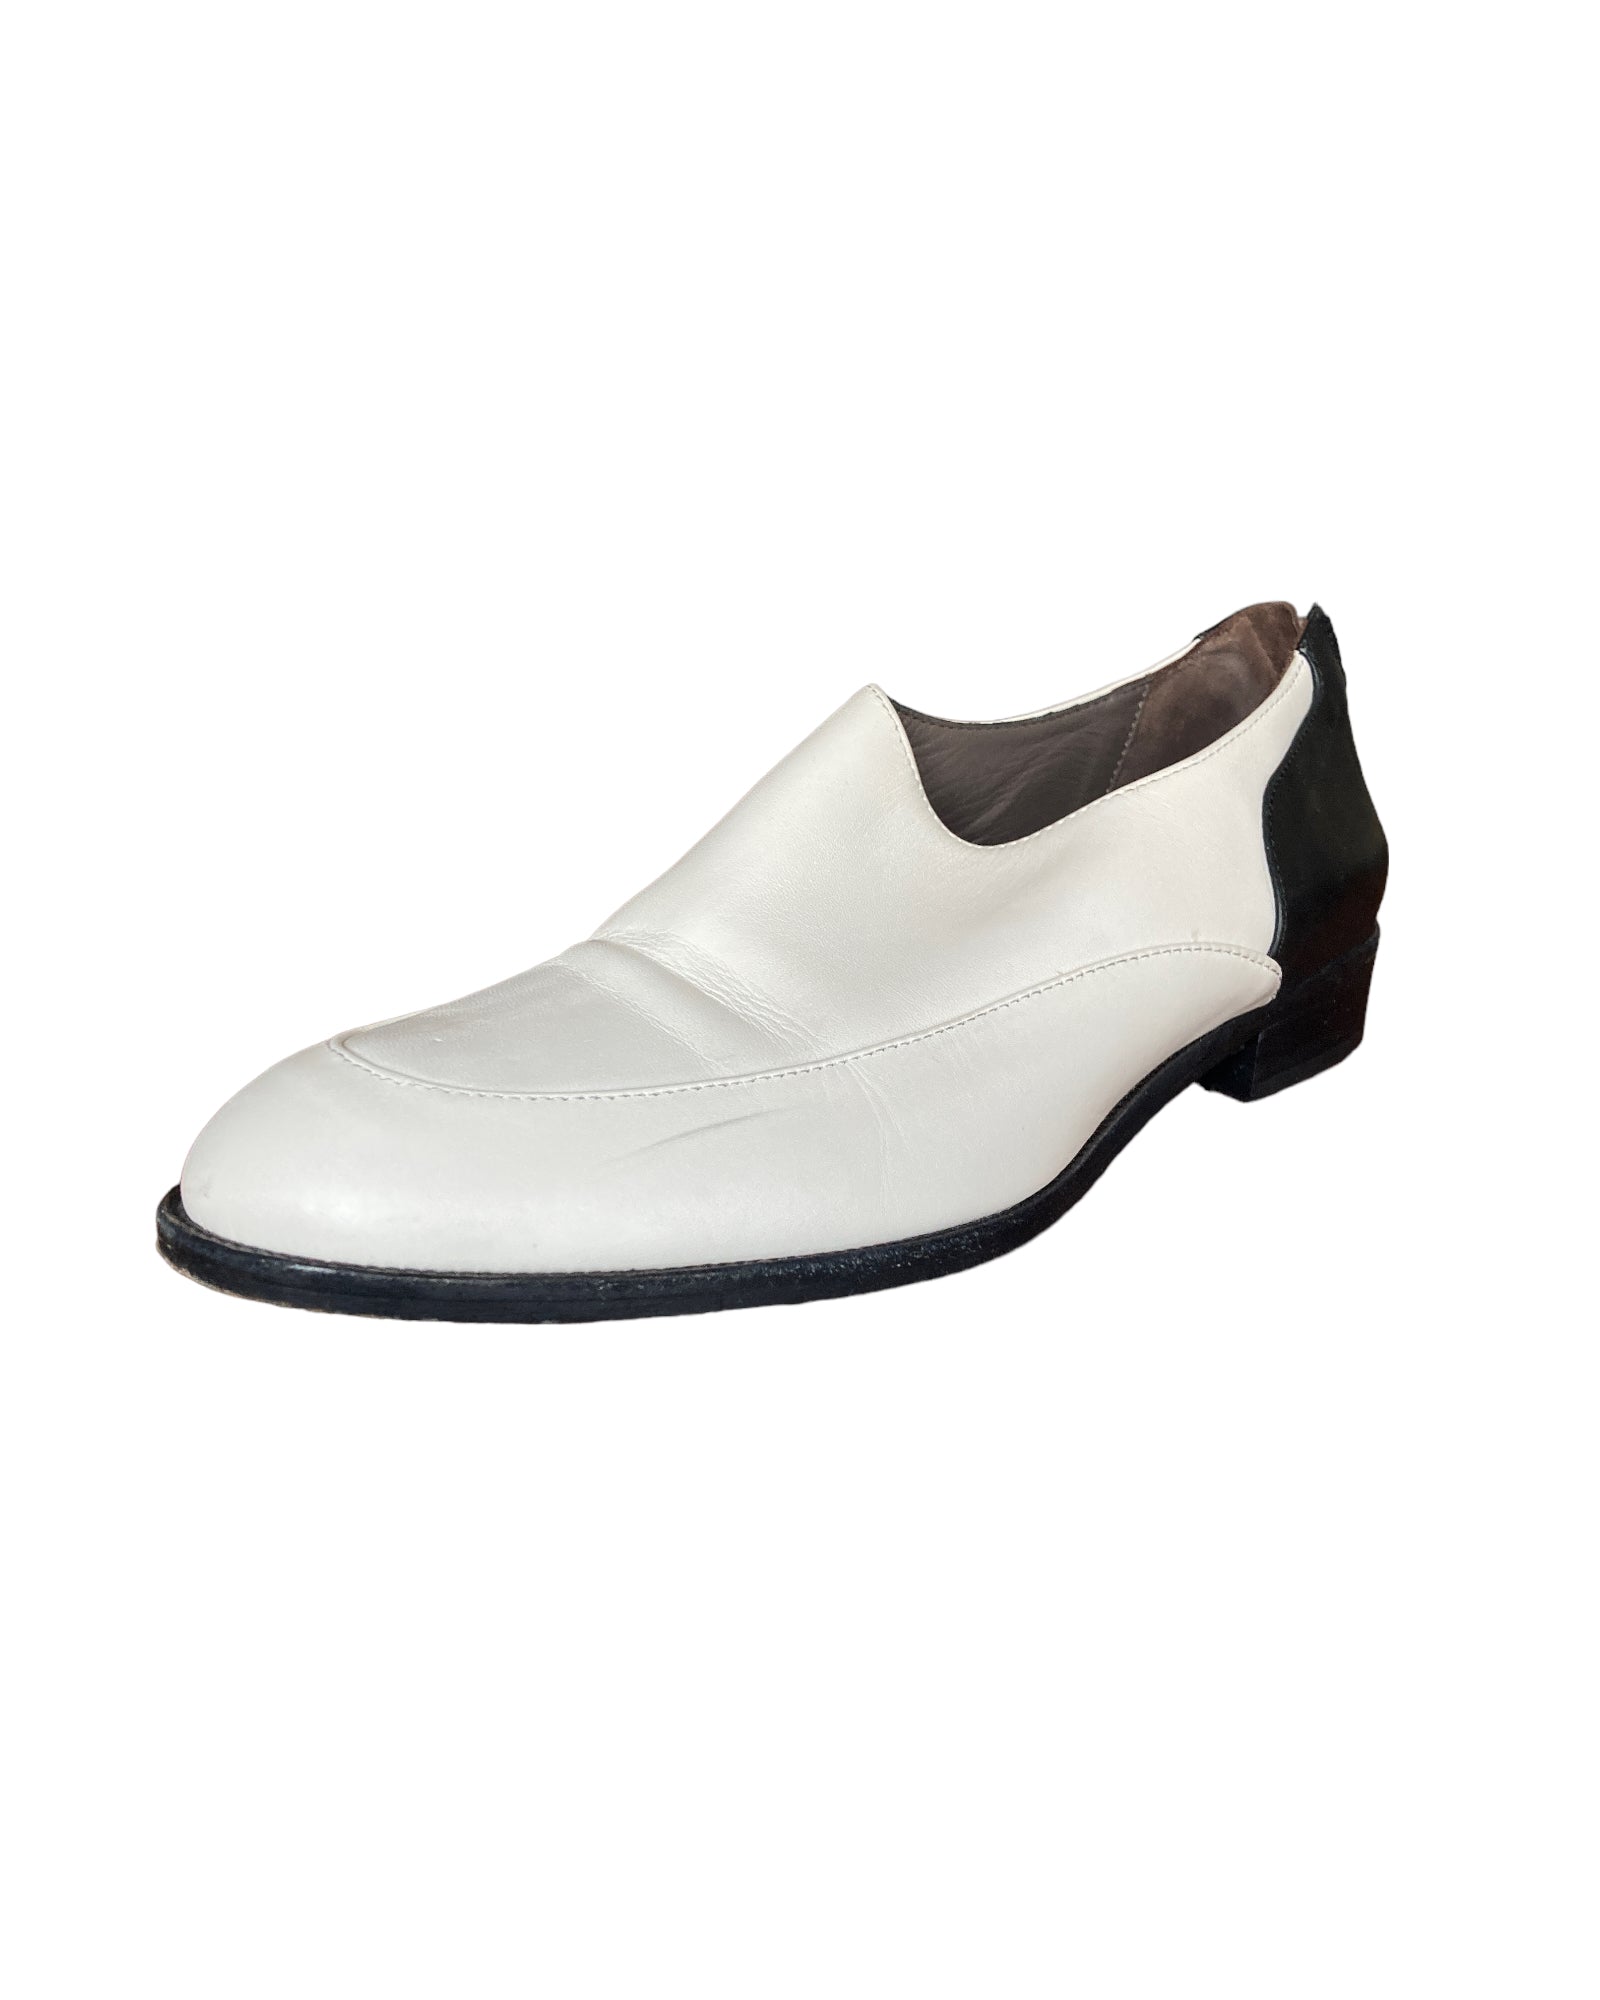 Tibi White and Black Loafers, 37.5